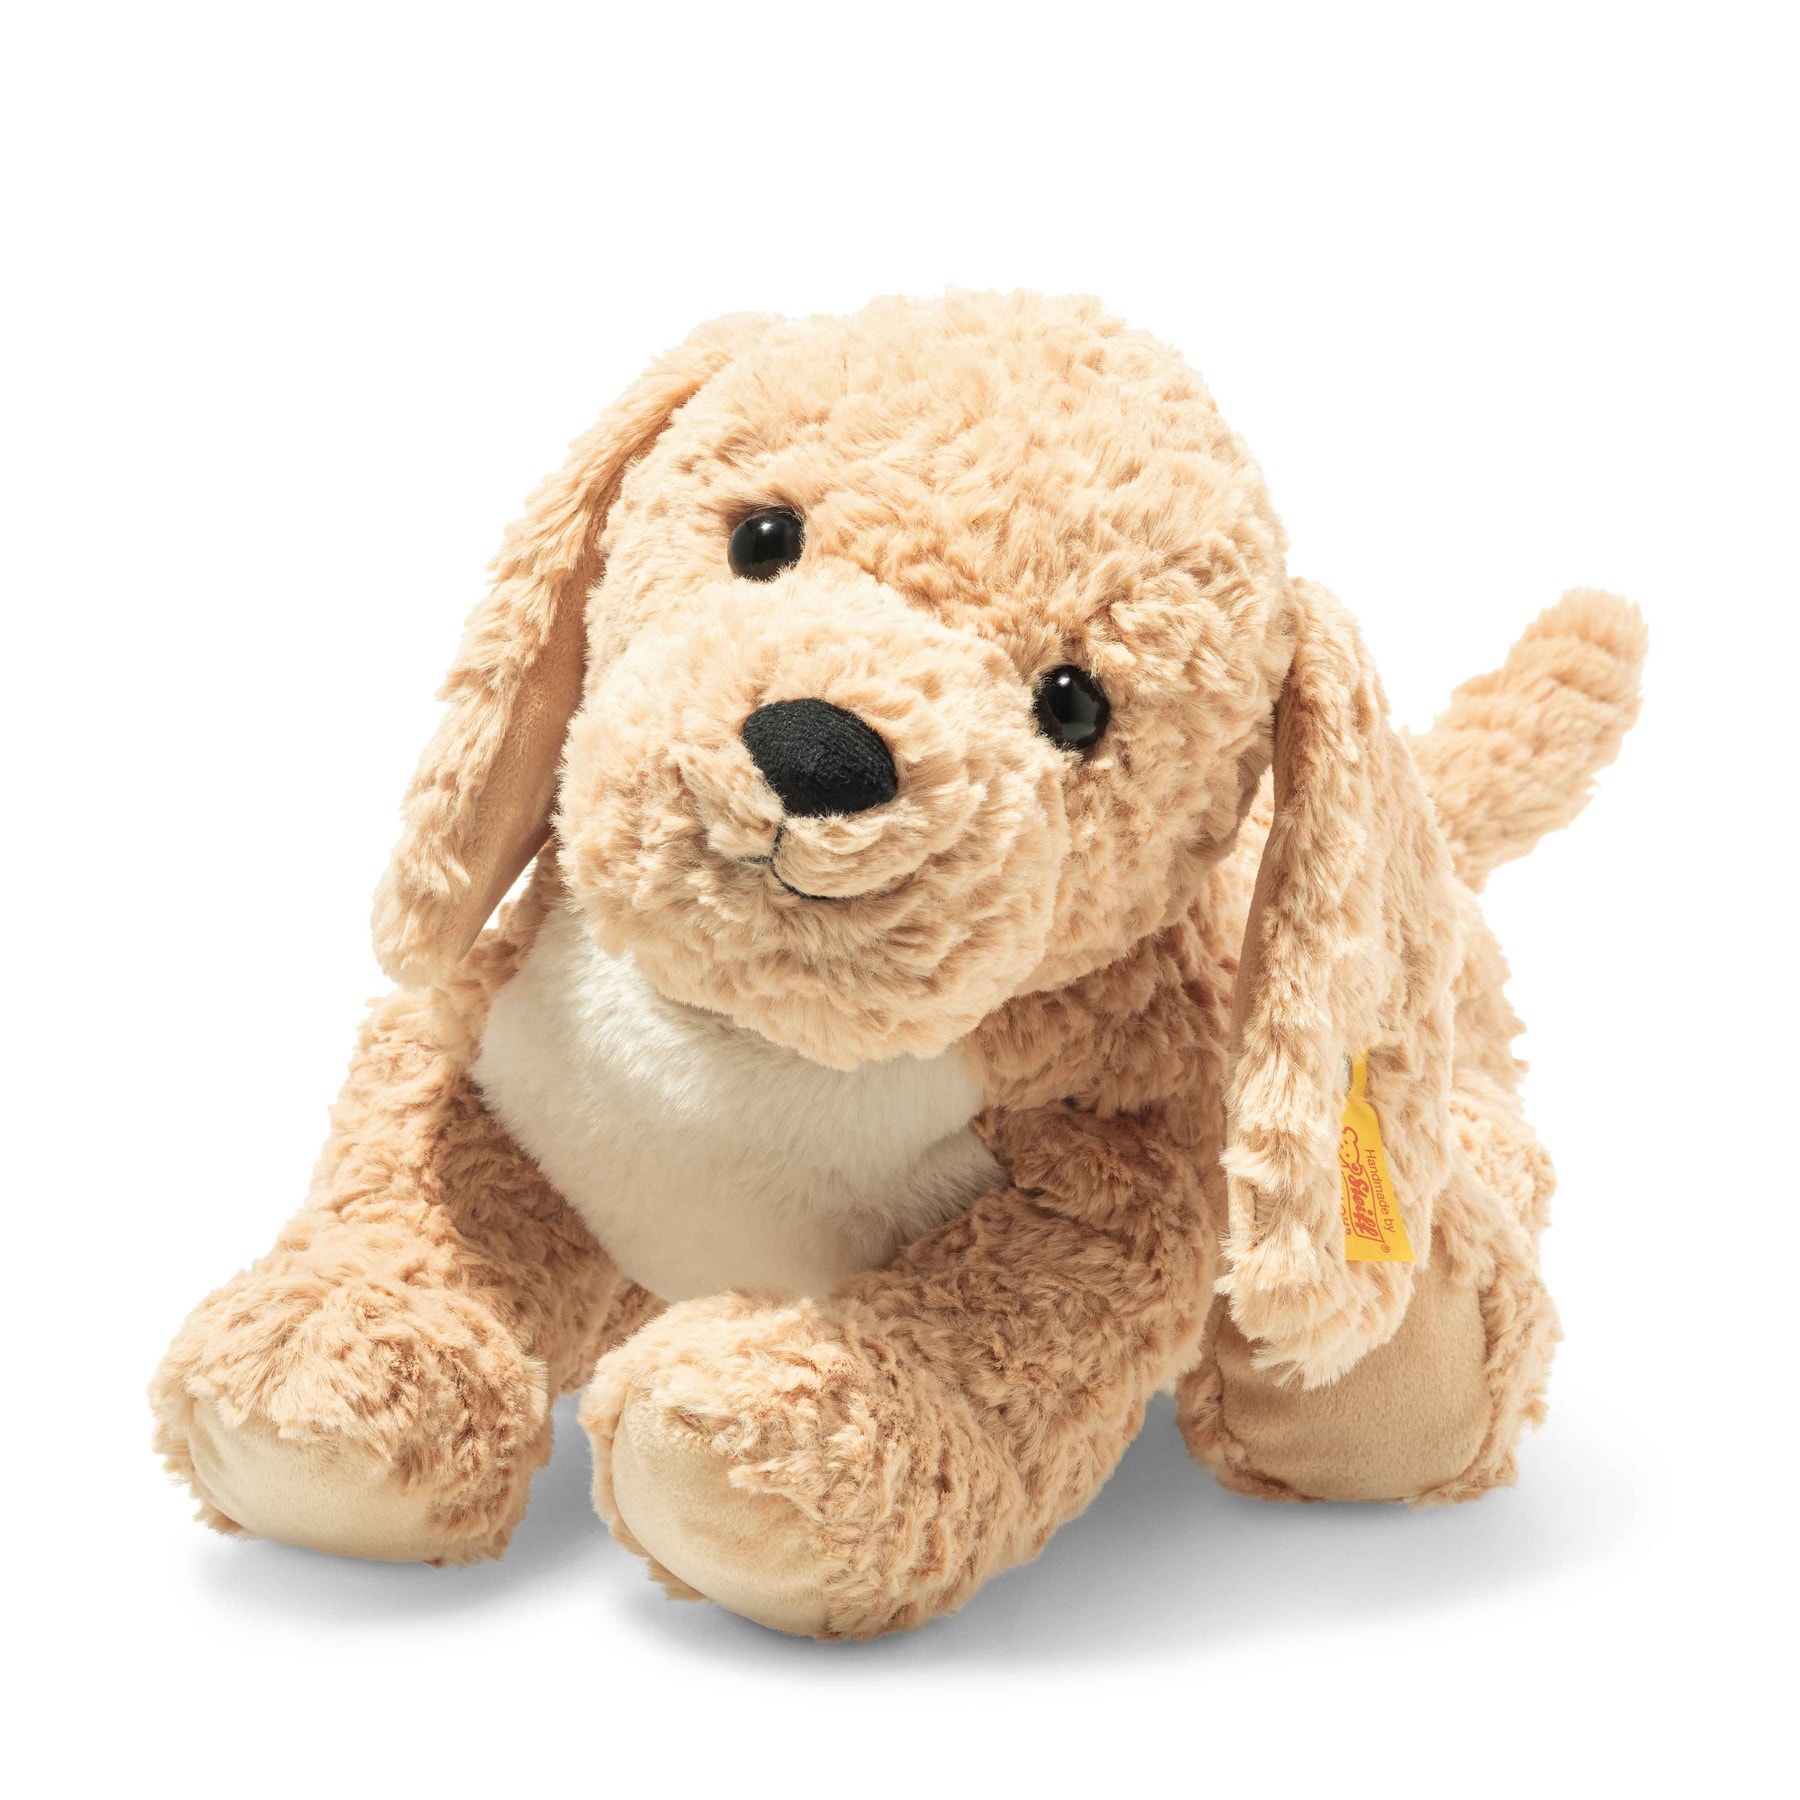 Shop by Category - Gifts - Gifts for Children - Steiff Stuffed